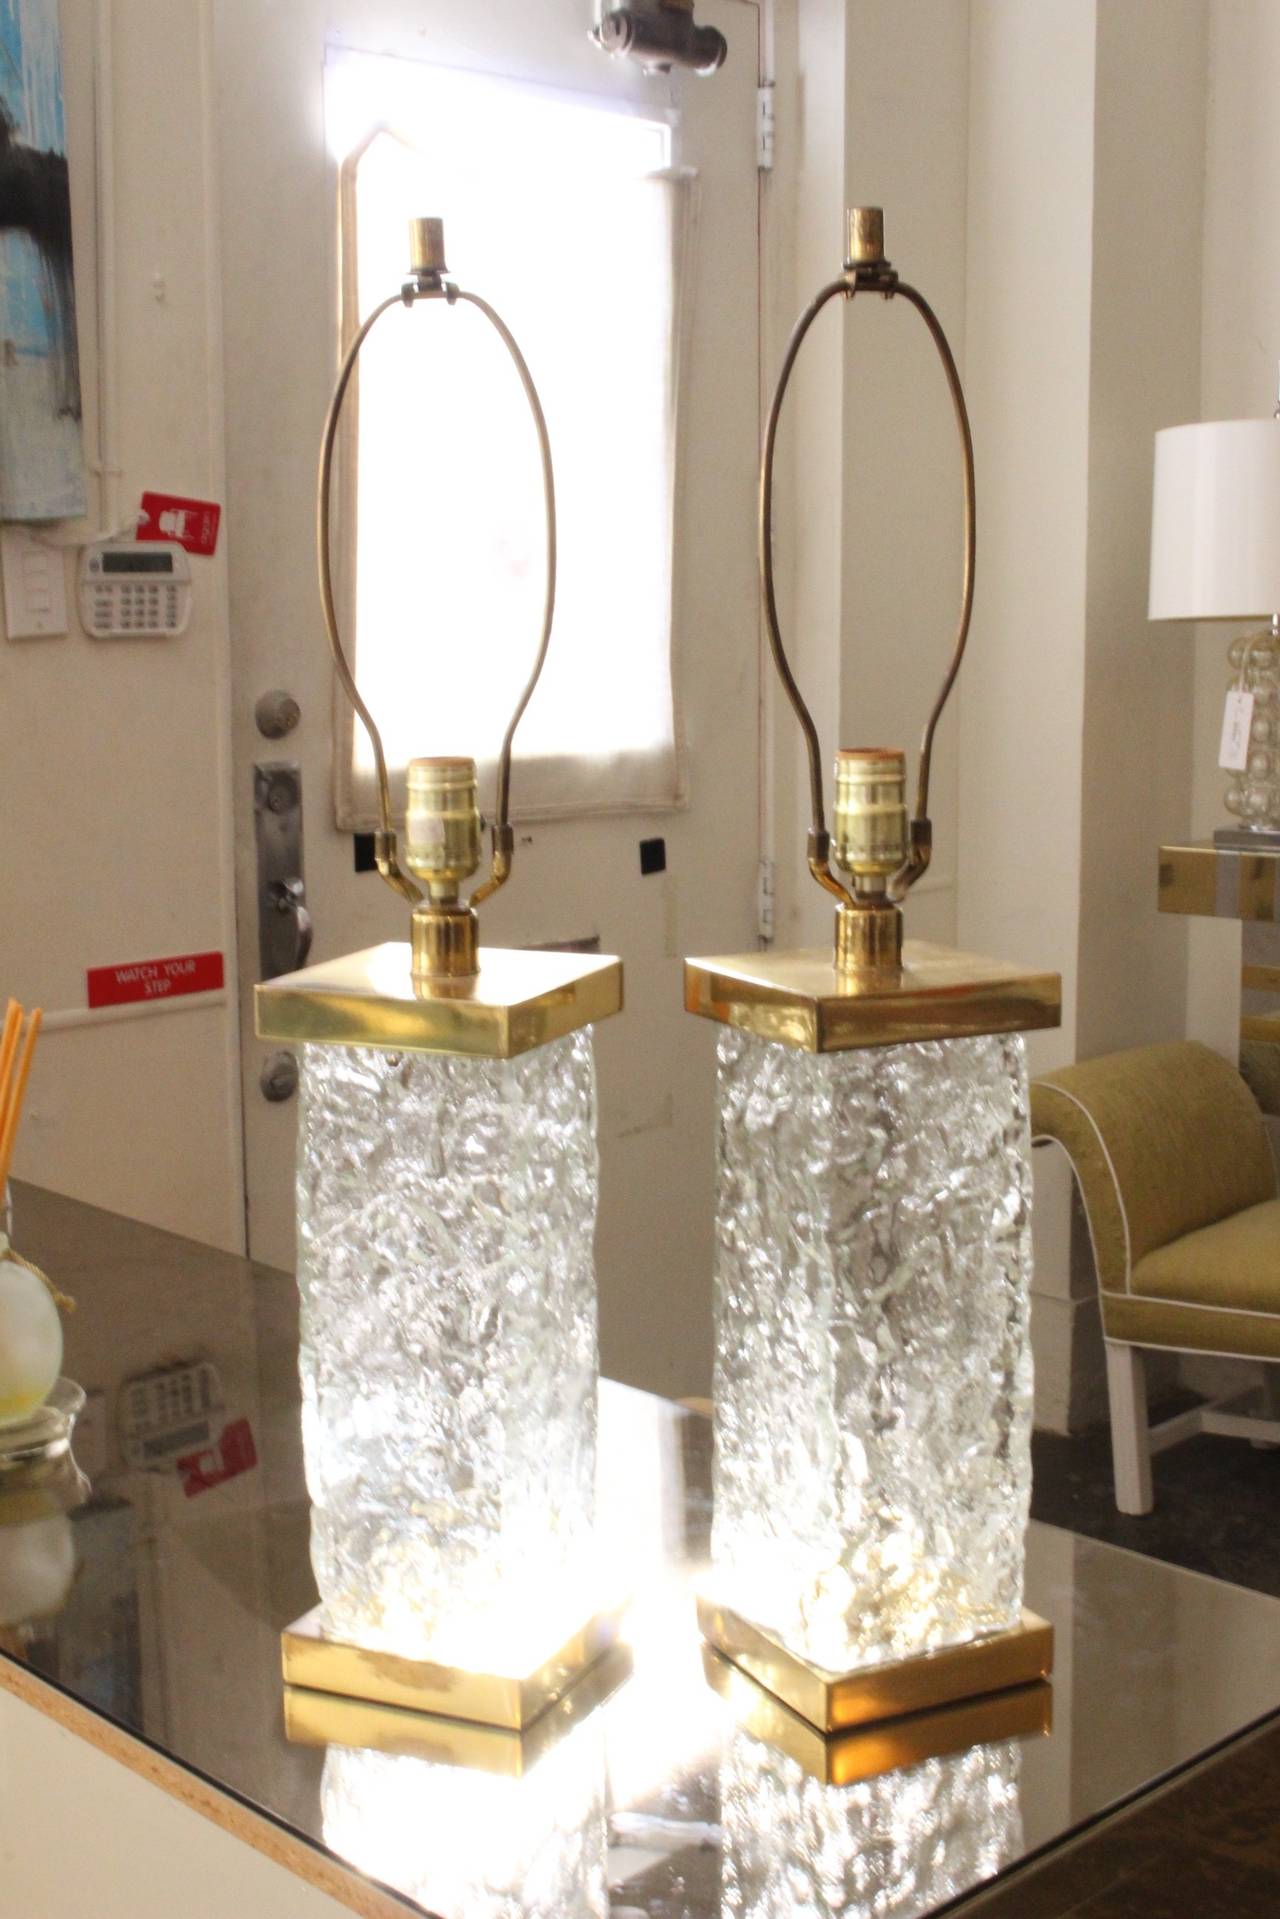 Pair of textured glass and brass lamps by Paul Hanson. Lamps have original wiring, circa 1960s

Dimensions: 5